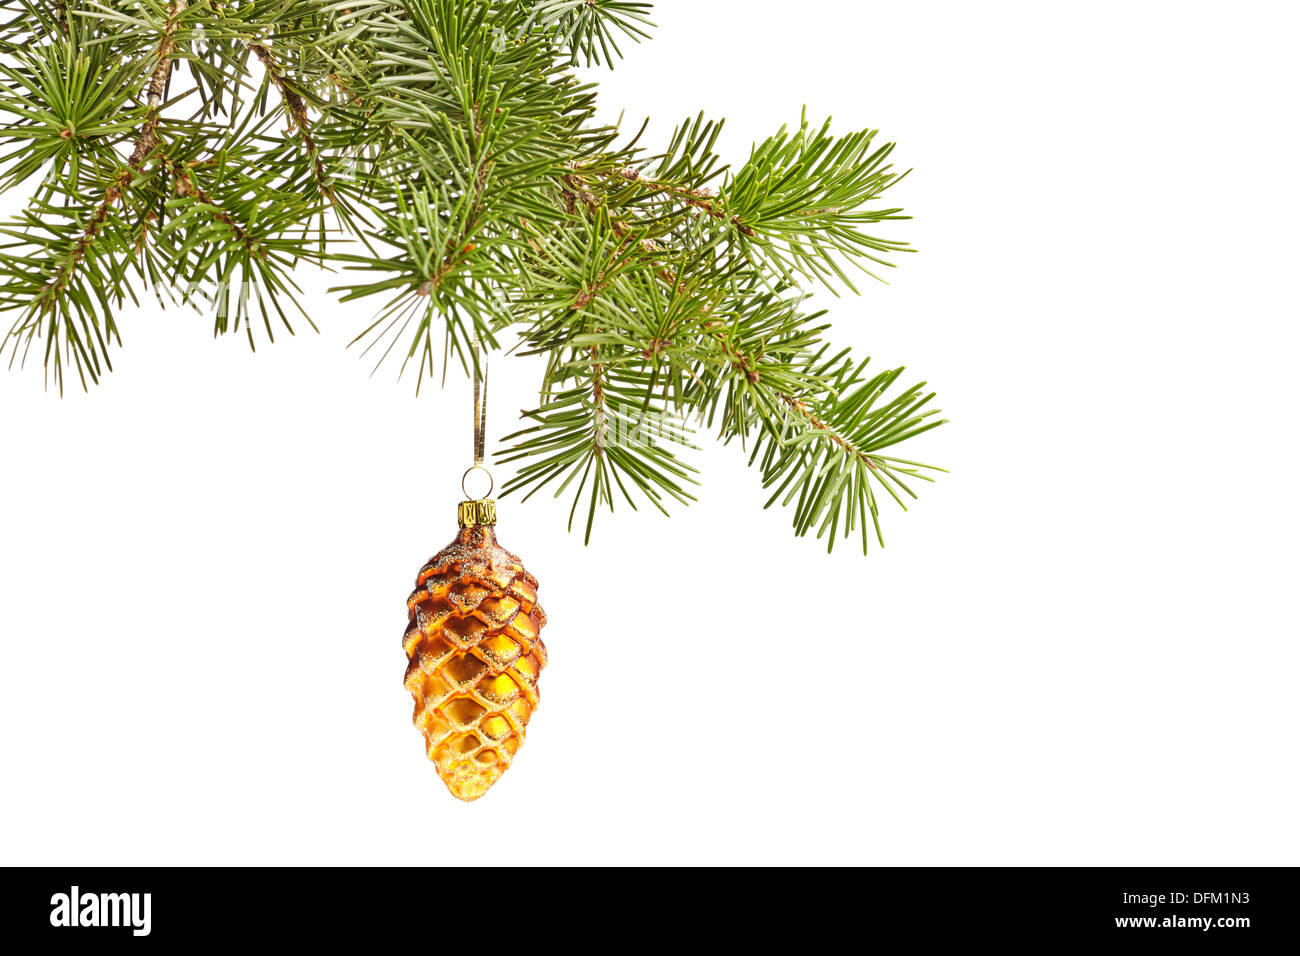 Christmas yellow cone on fir tree isolated Stock Photo